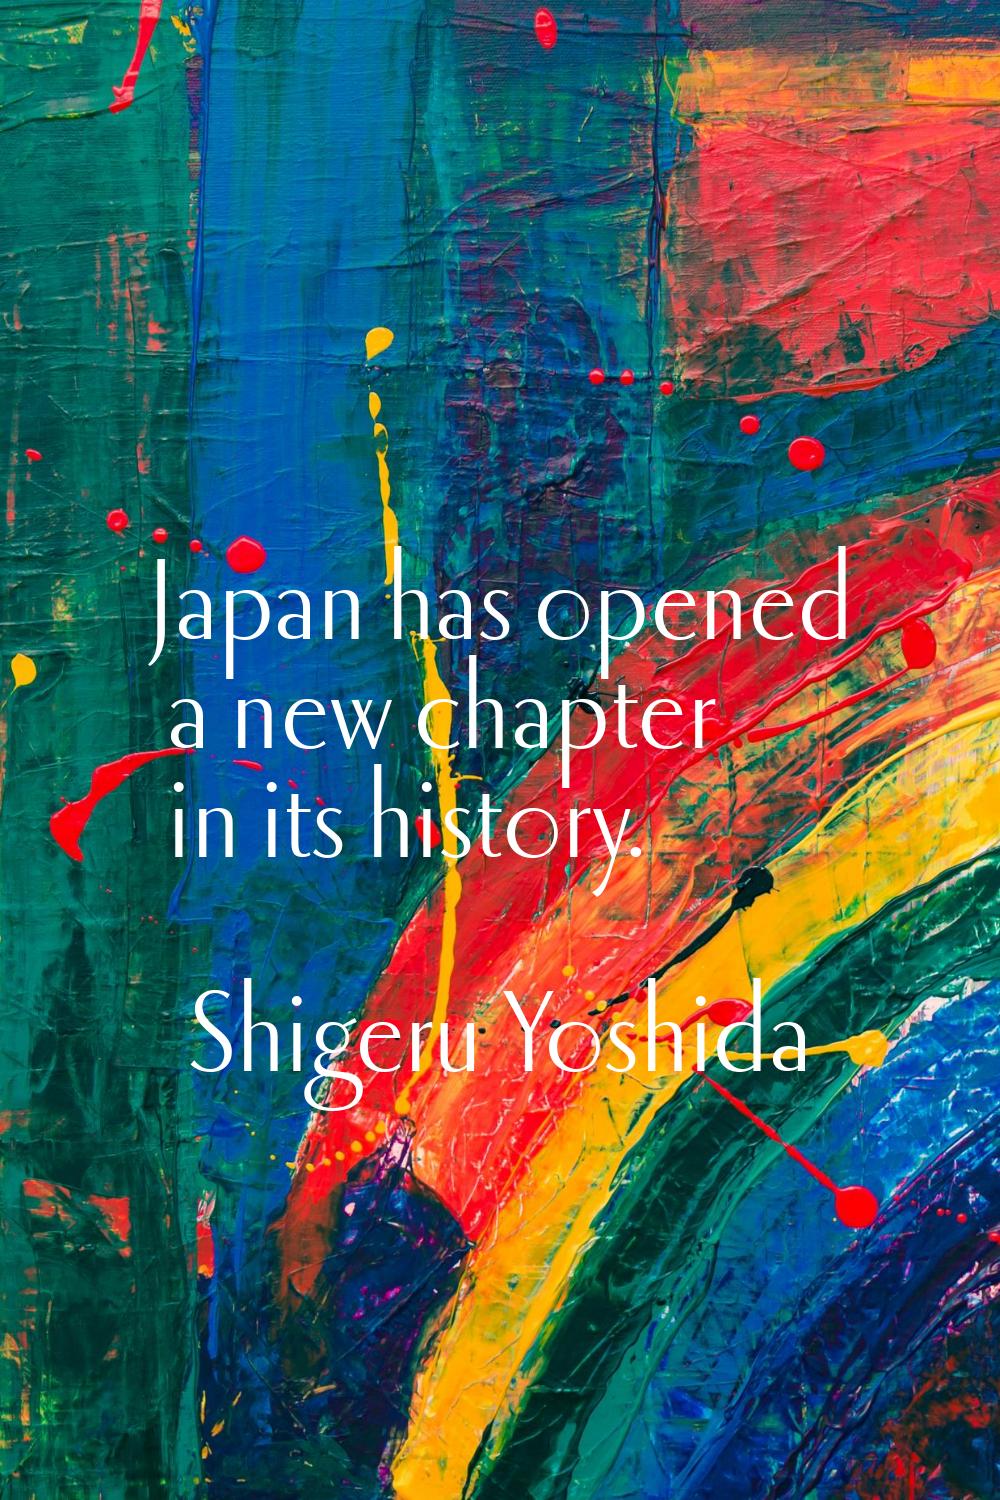 Japan has opened a new chapter in its history.